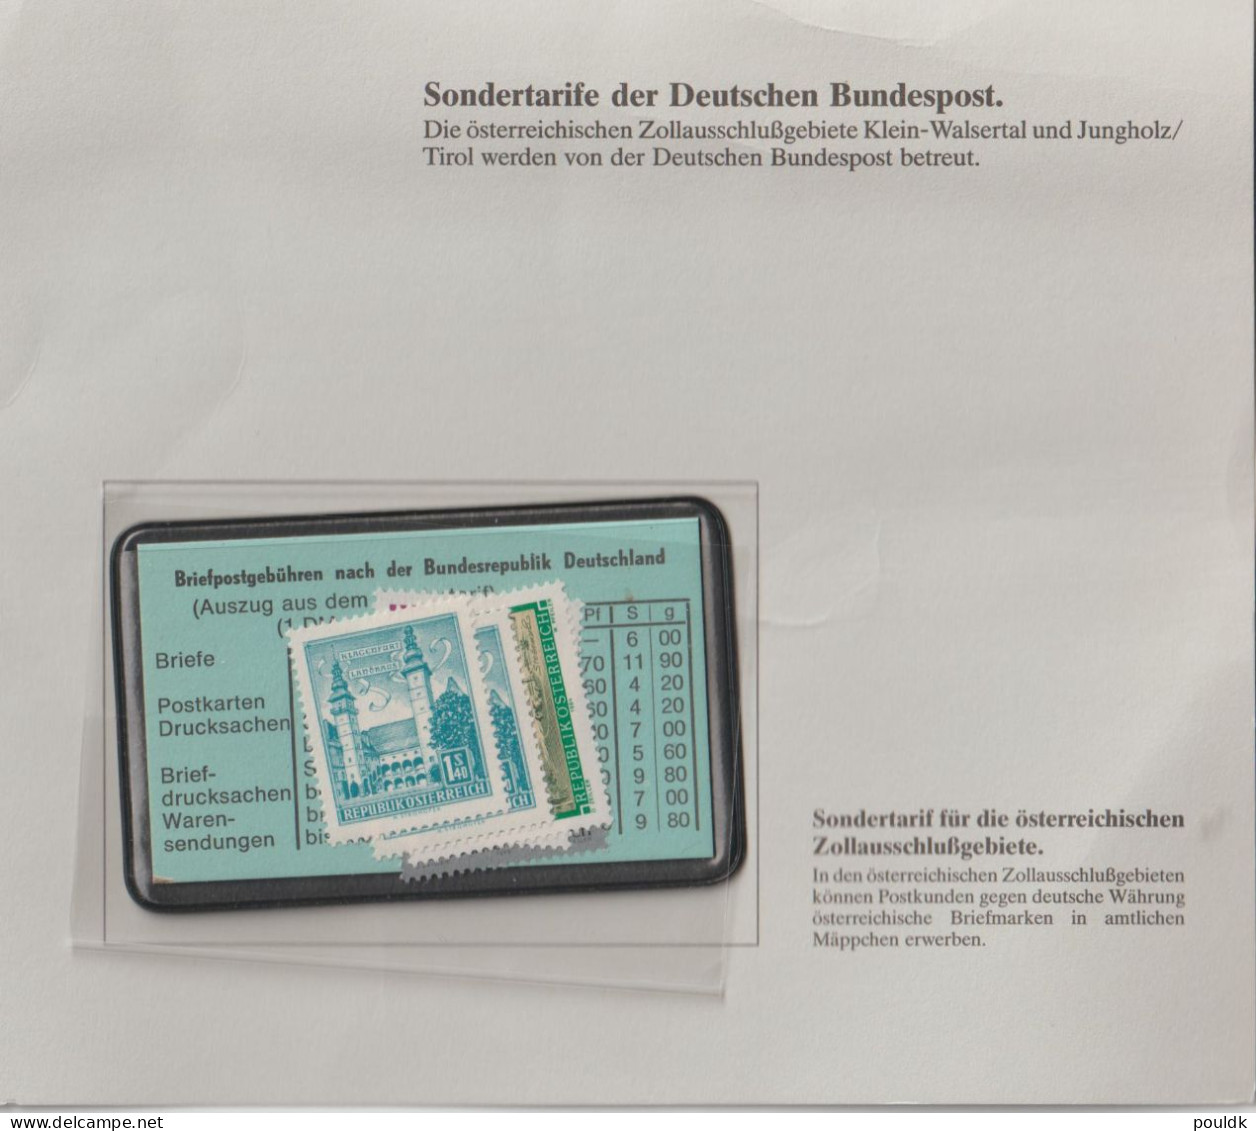 Map W/Austrian Stamps To Be Used By Two Small Areas In Austria Being Serviced By The German Post - Mint. Postal Weight A - Unused Stamps